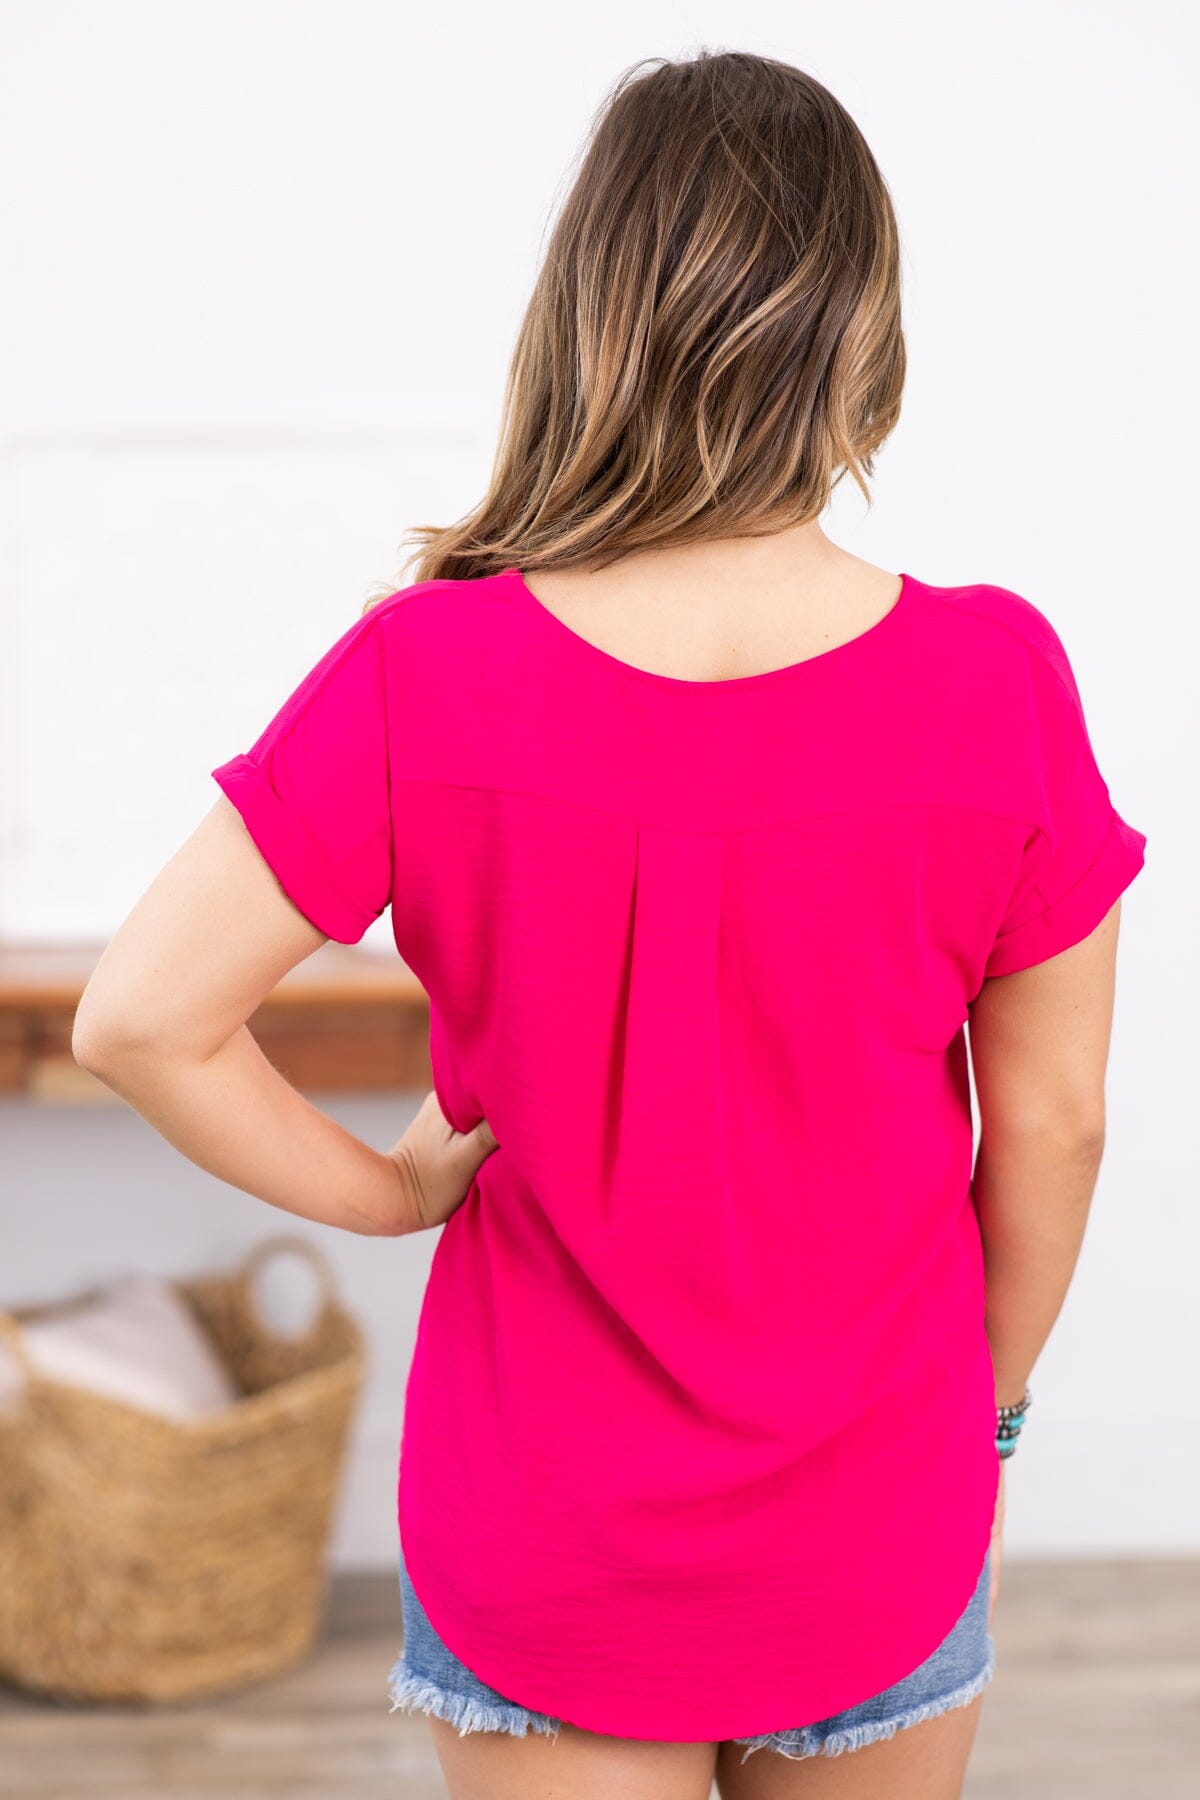 Hot Pink Short Sleeve V-Neck Top - Filly Flair